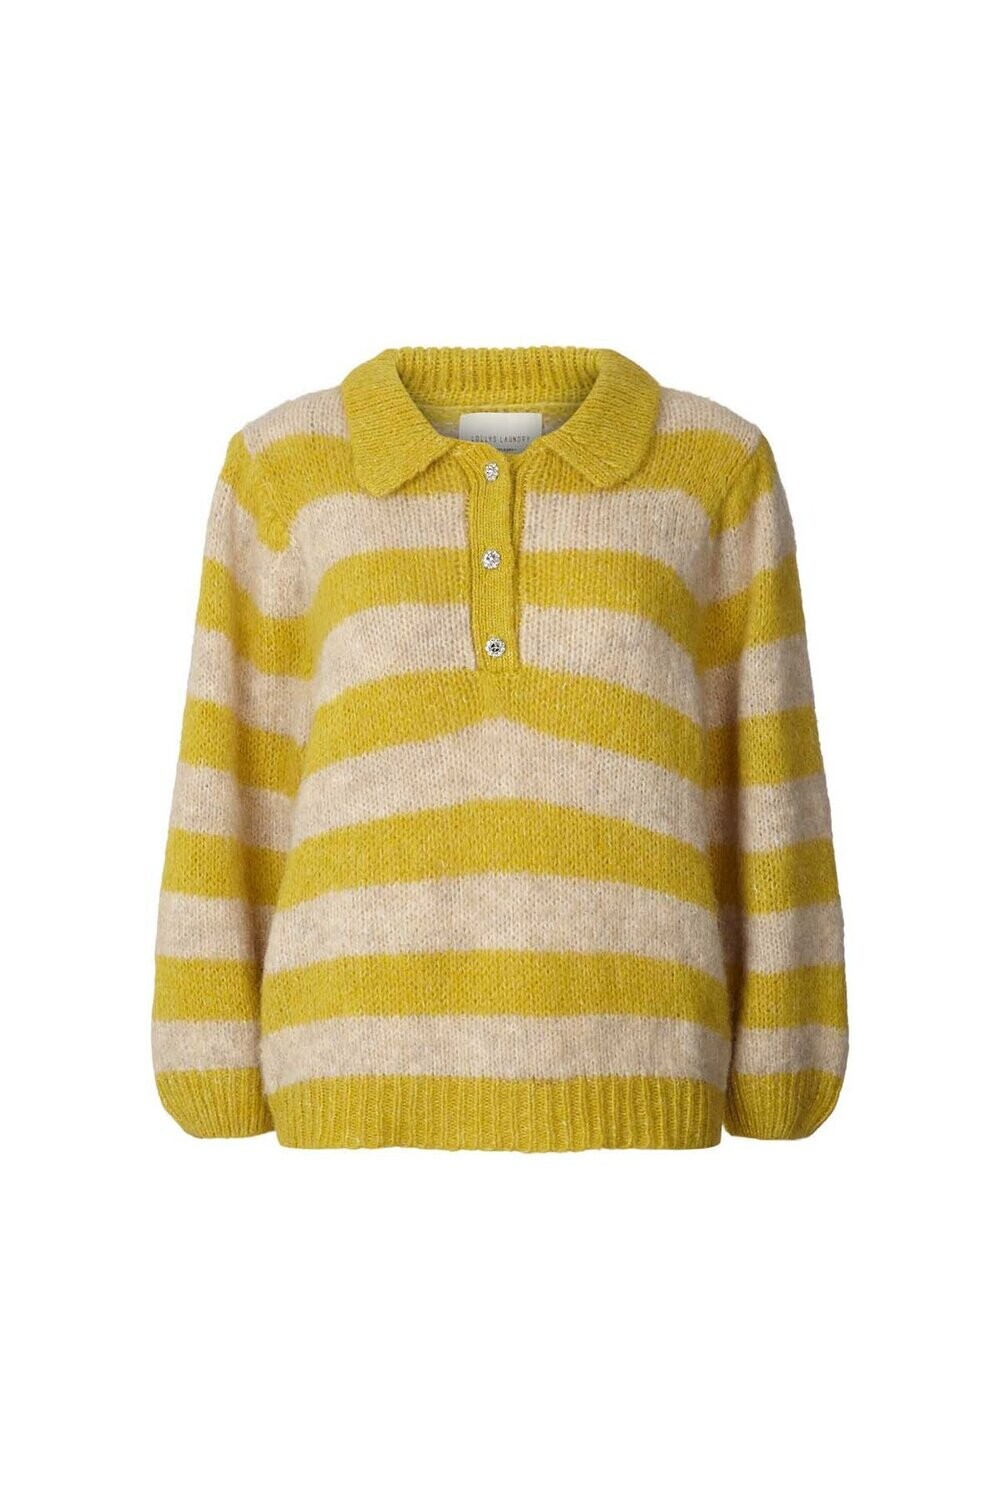 Lollys Laundry Dylan Jumper Yellow